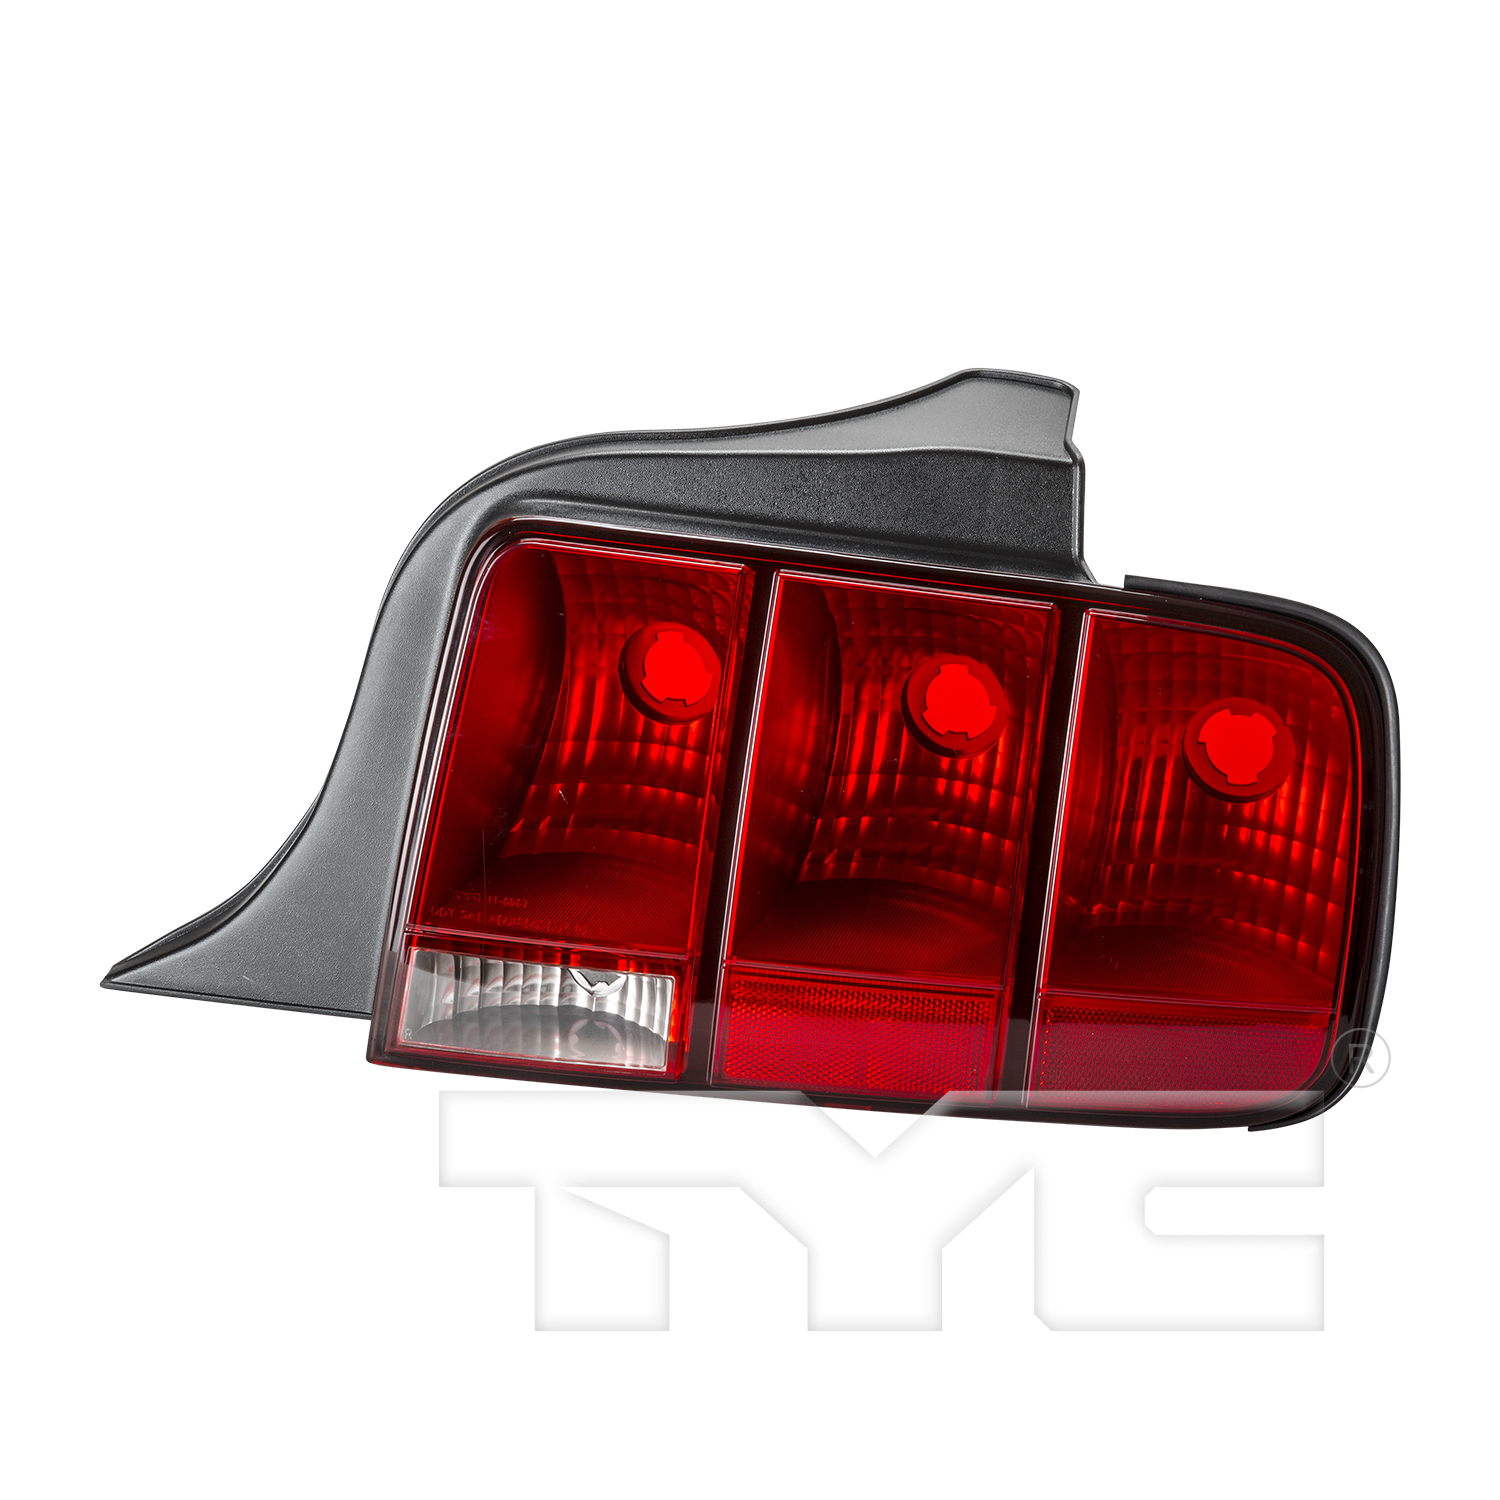 Aftermarket TAILLIGHTS for FORD - MUSTANG, MUSTANG,05-09,RT Taillamp assy